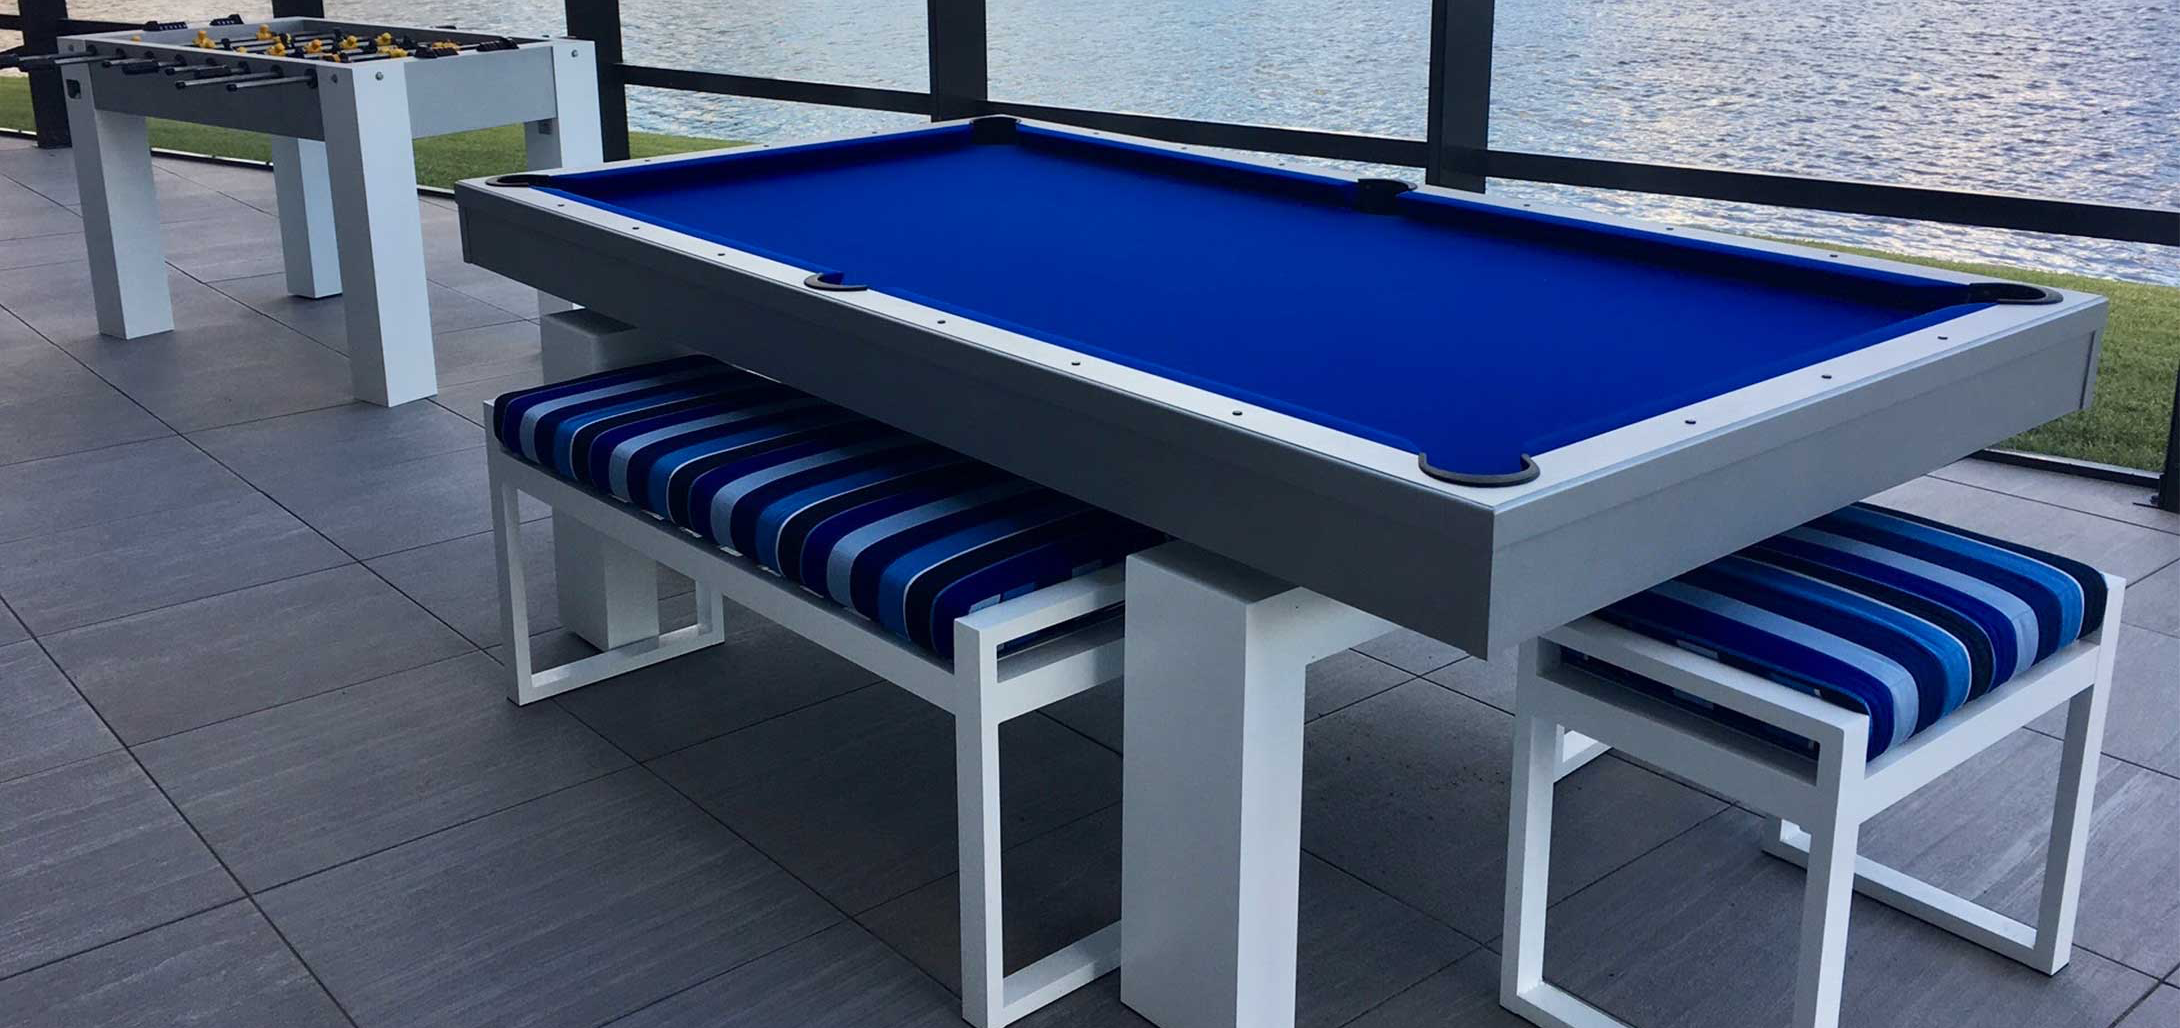 Outdoor Pool Table and Foosball Table on a deck at a lake